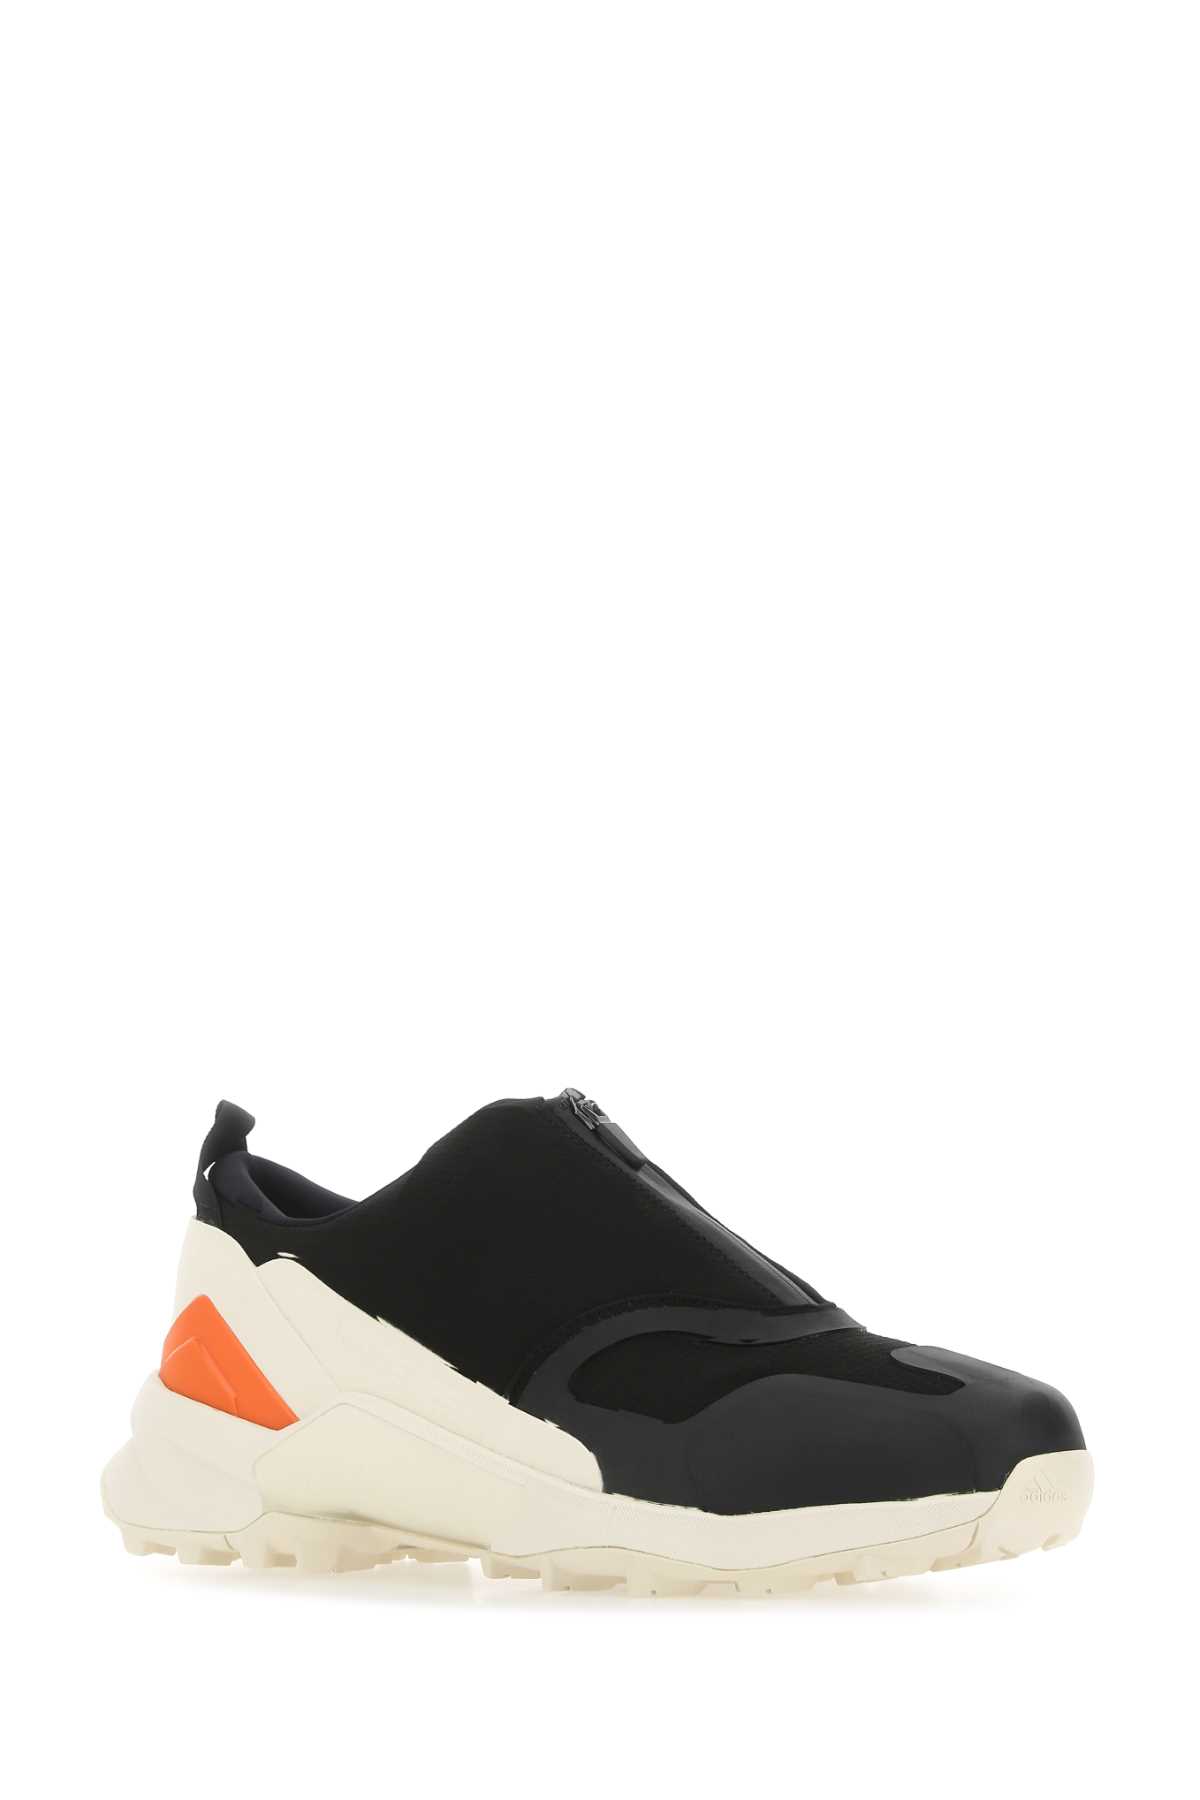 Y-3 Multicolor Fabric And Rubber Terrex Swift R3 Trainers In Blackcwhiteorange